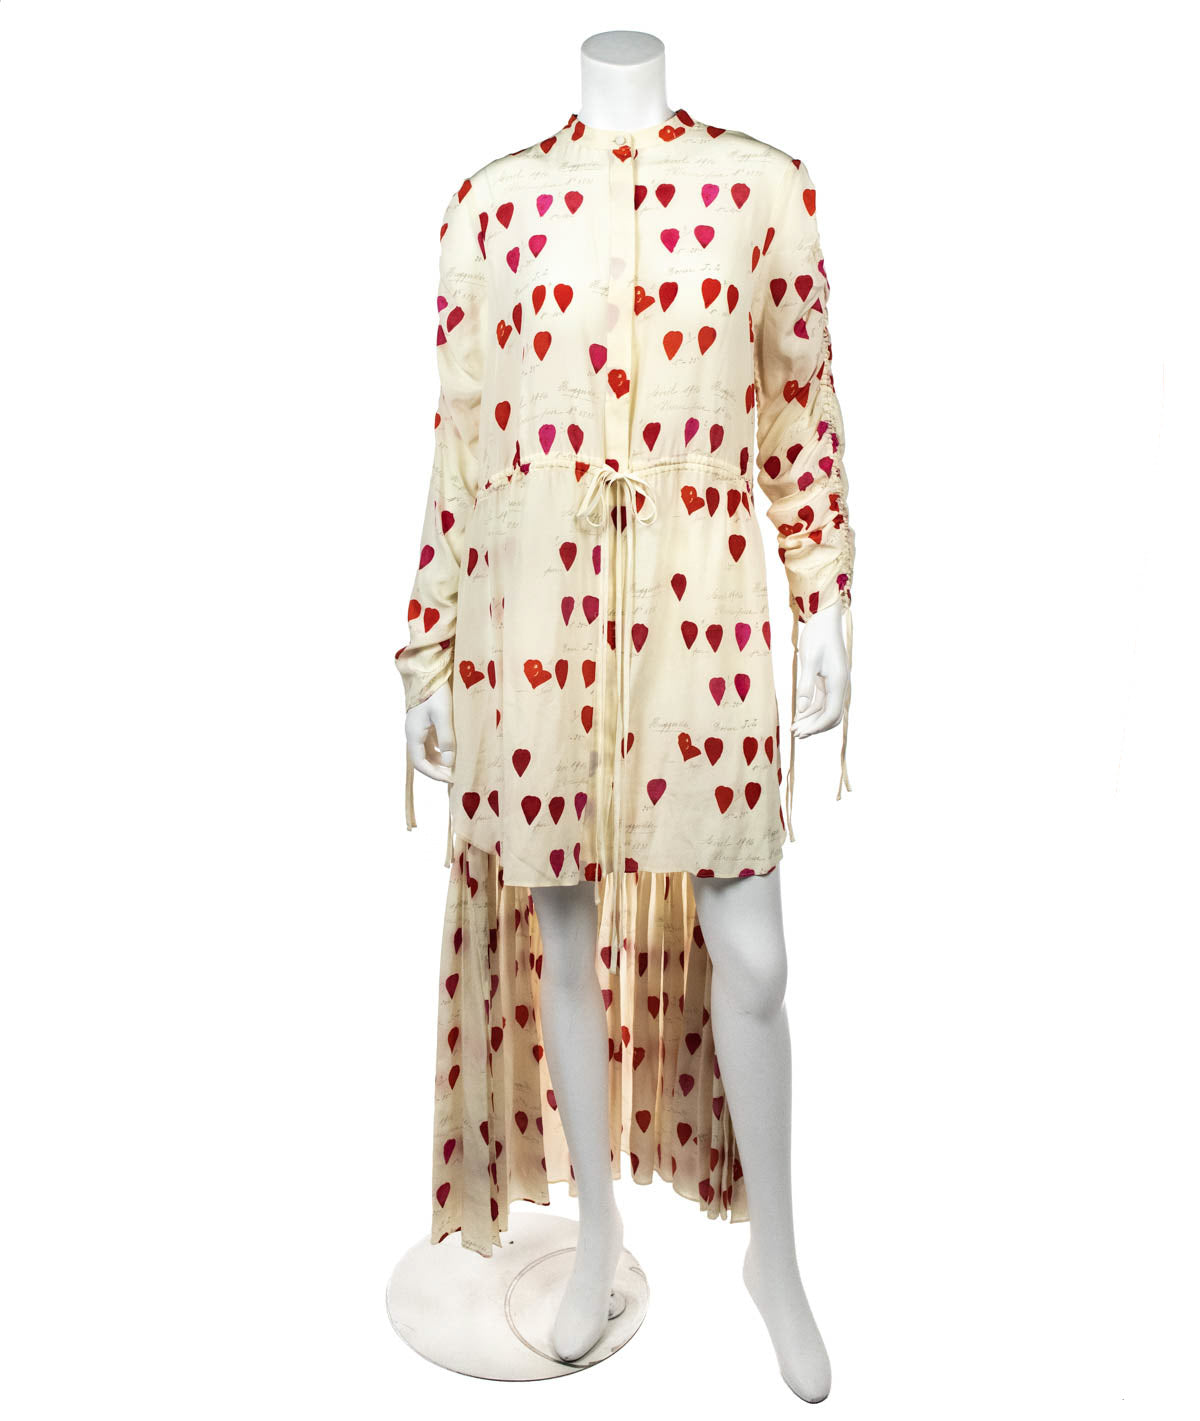 Alexander McQueen White & Red Heart Print Silk Dress Size M | IT 44 - Love that Bag etc - Preowned Authentic Designer Handbags & Preloved Fashions